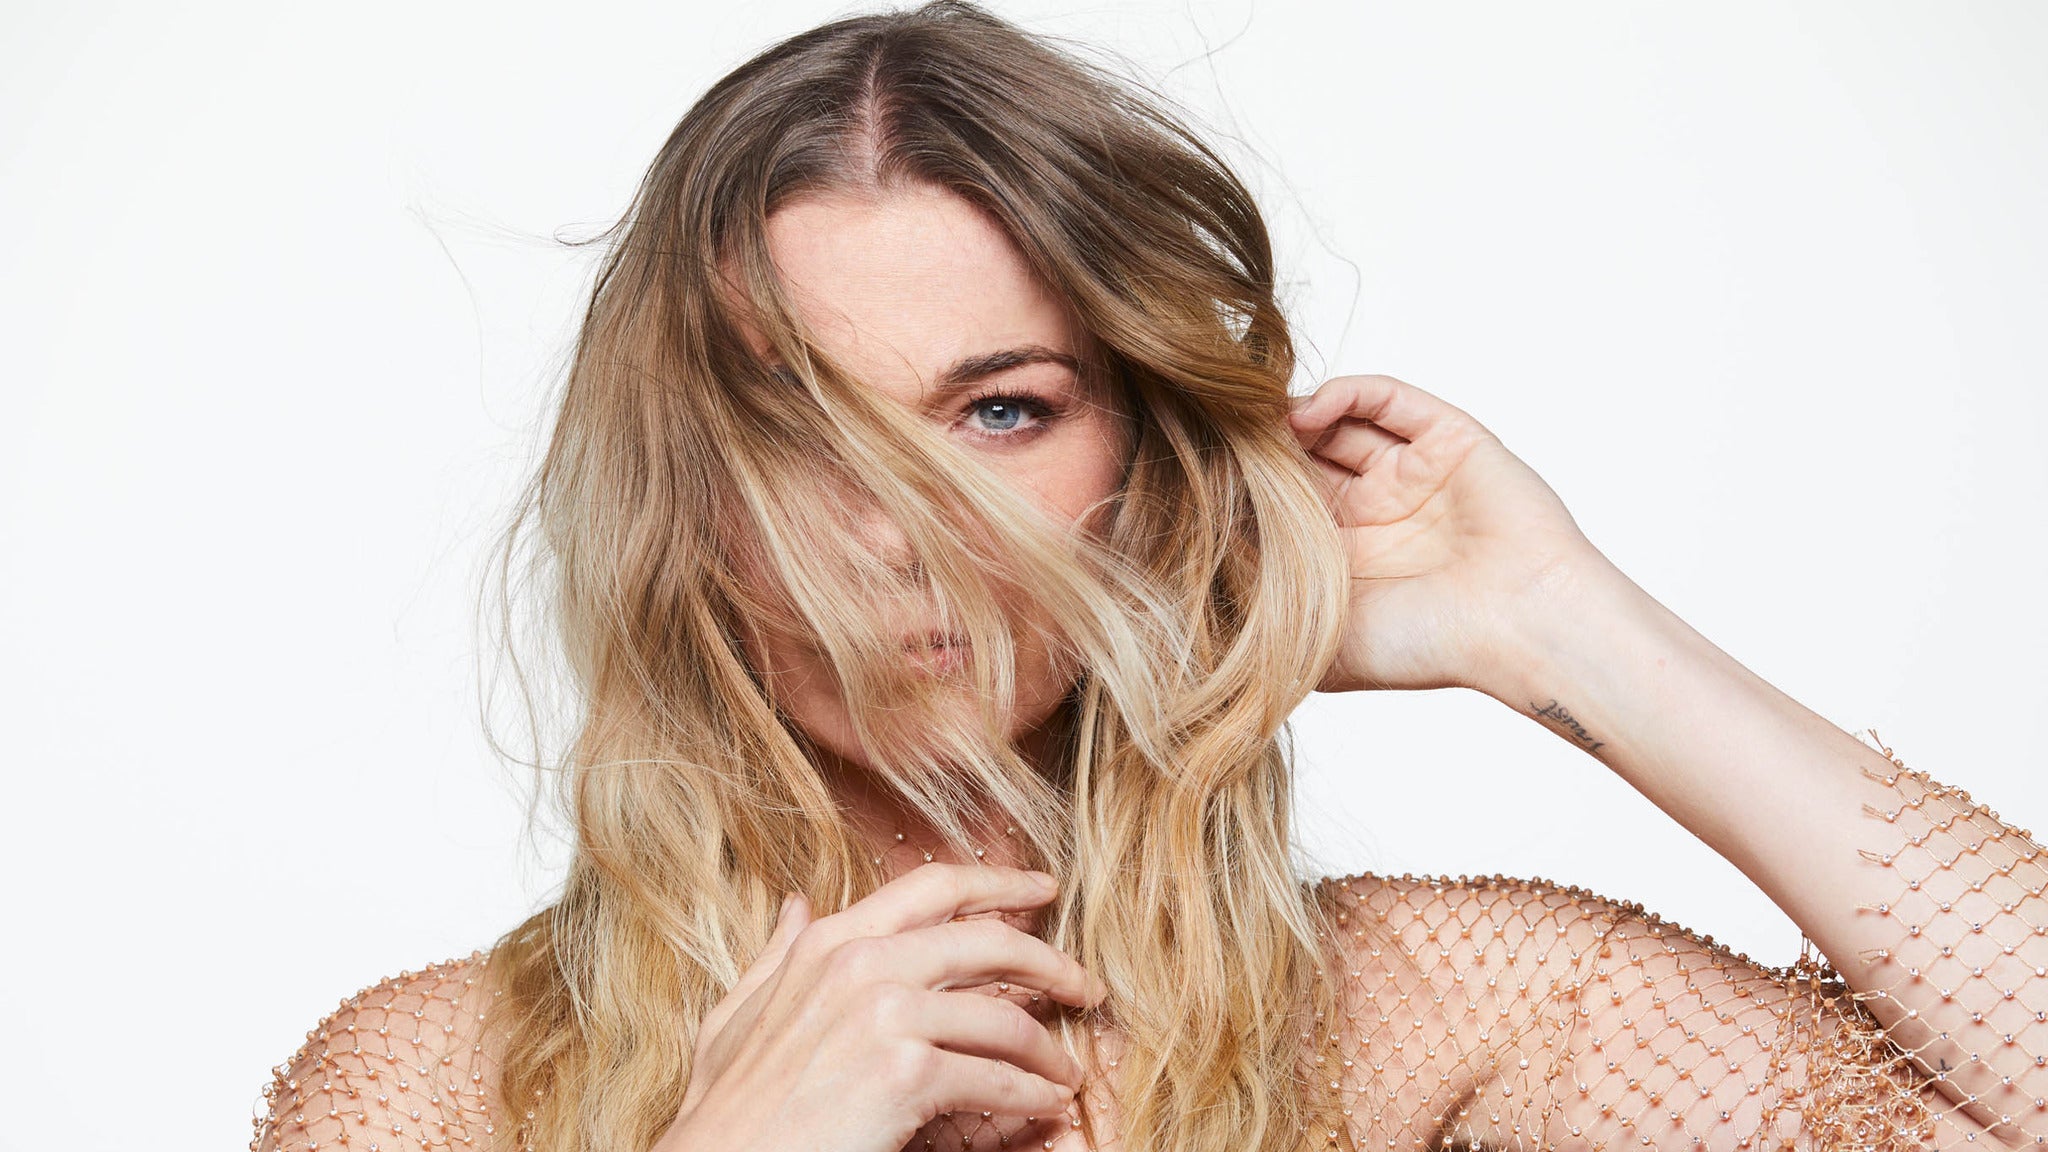 members only presale code to LeAnn Rimes - JOY: The Holiday Tour tickets in Biloxi at Beau Rivage Theatre